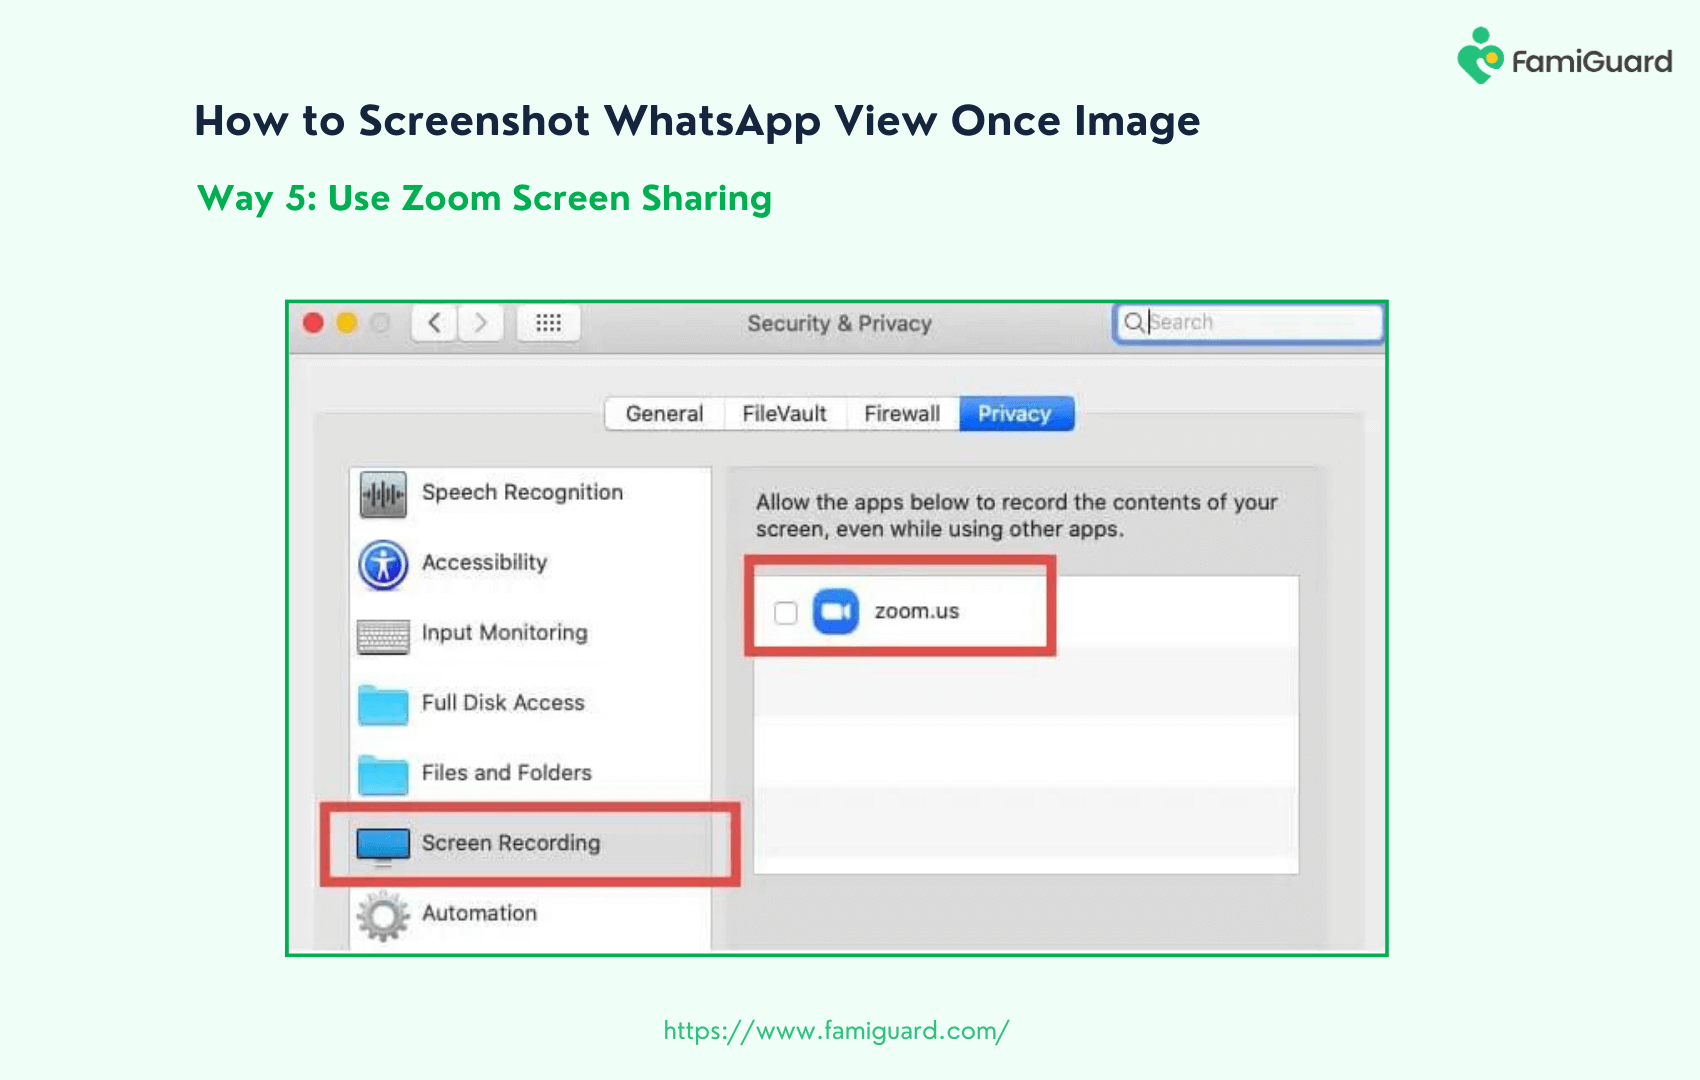 Use Zoom Screen Sharing to Screenshot WhatsApp View Once Image